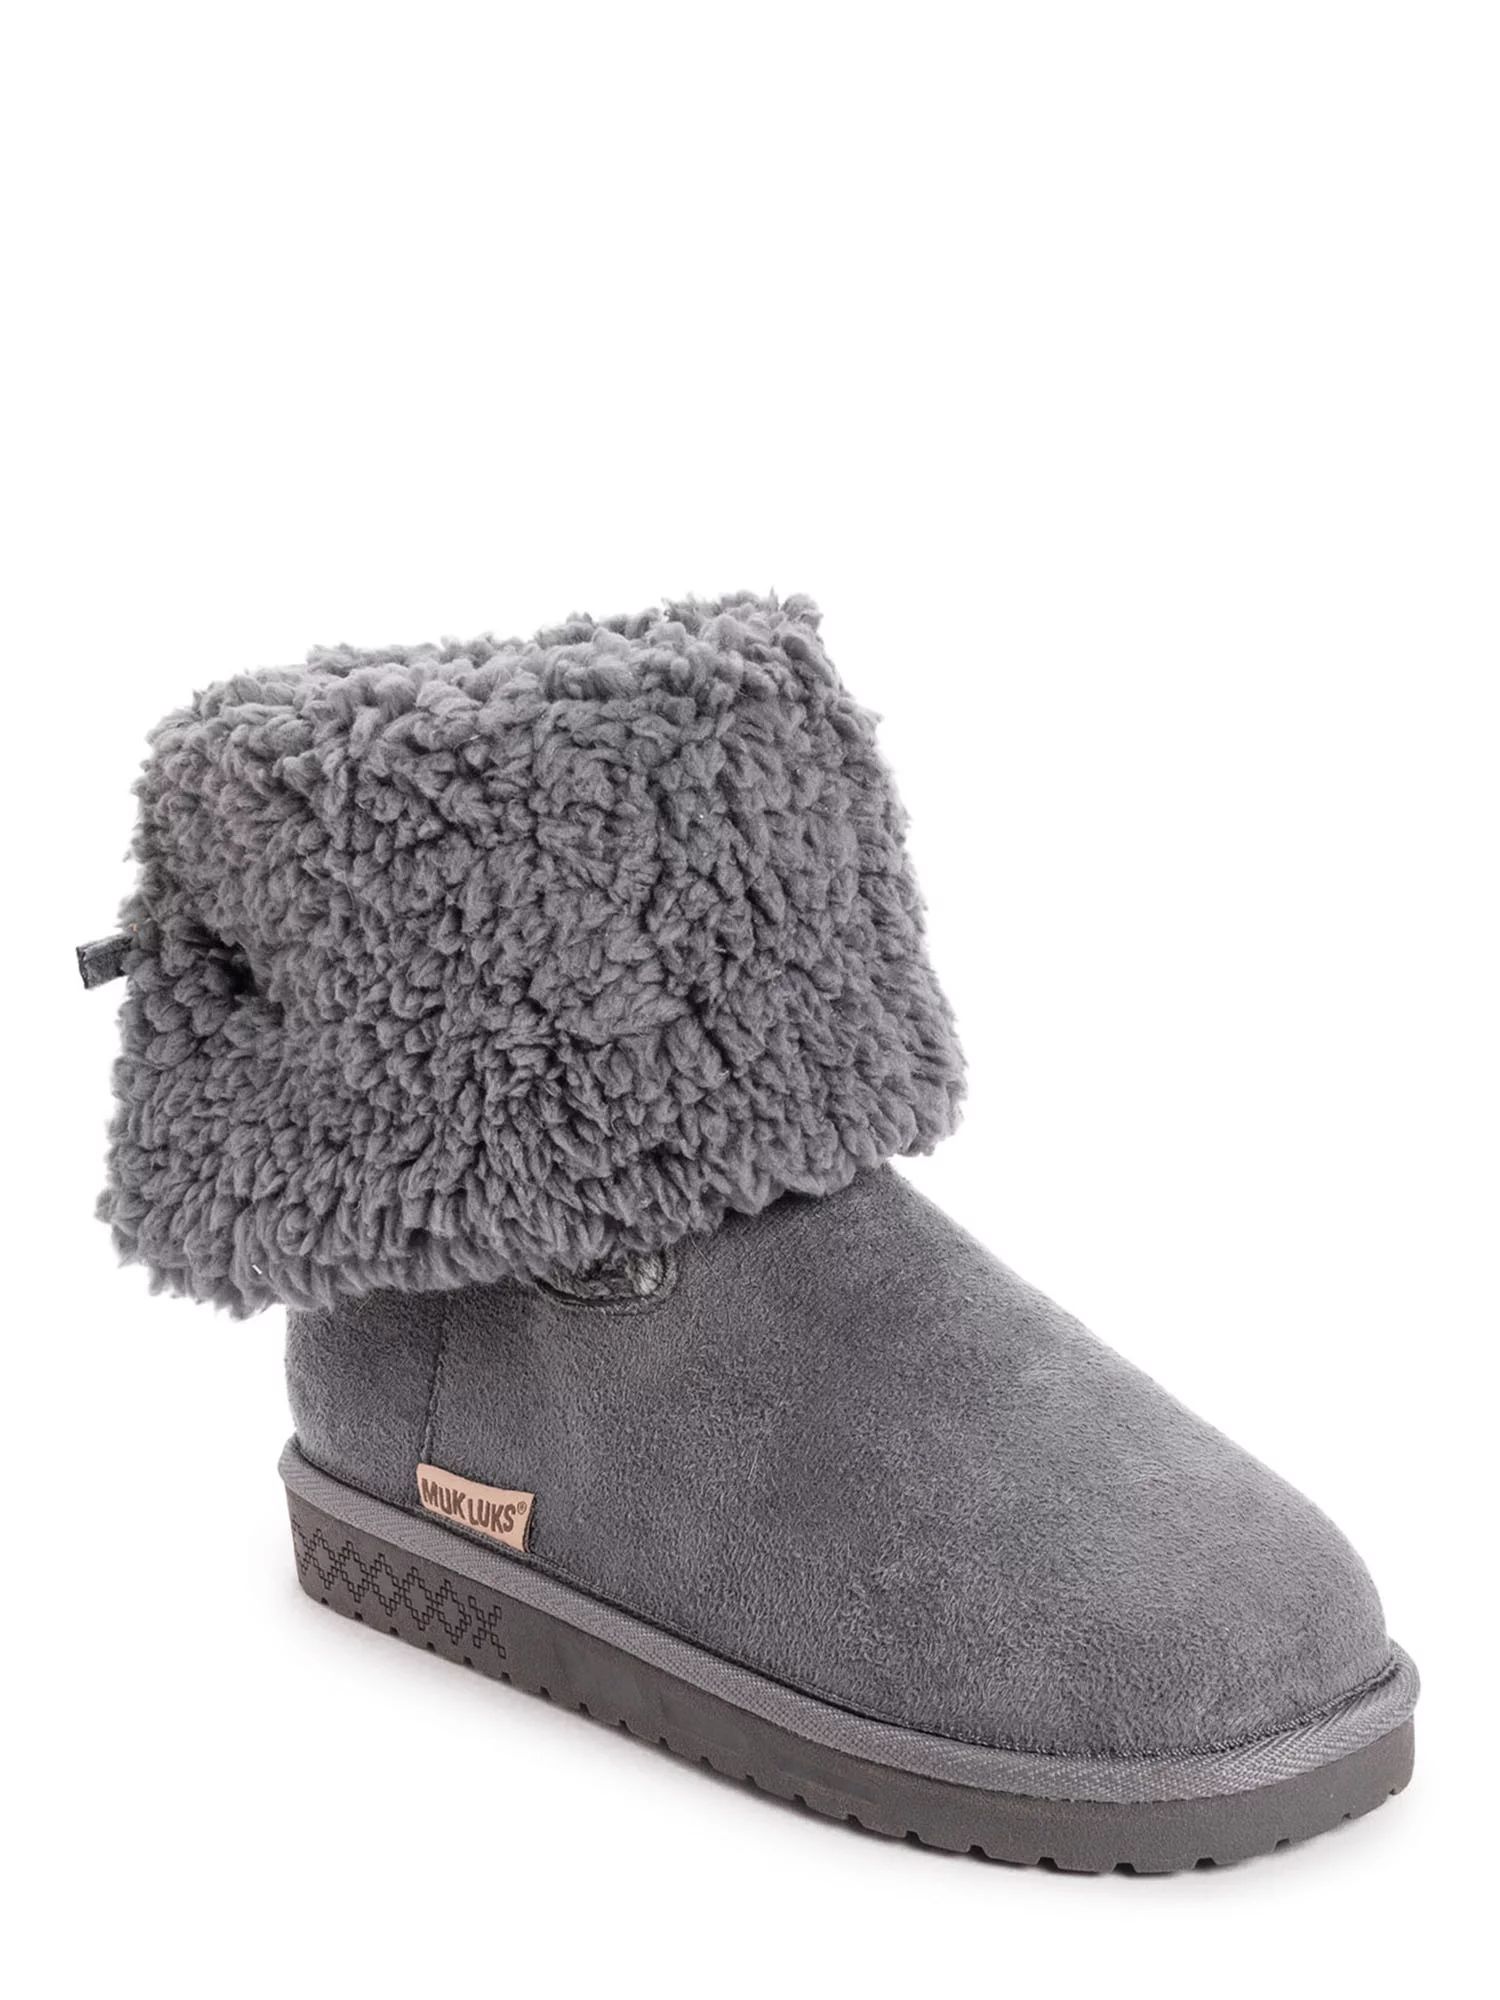 Muk Luks Women's Fold Over Boots (Wide Width Available) | Walmart (US)